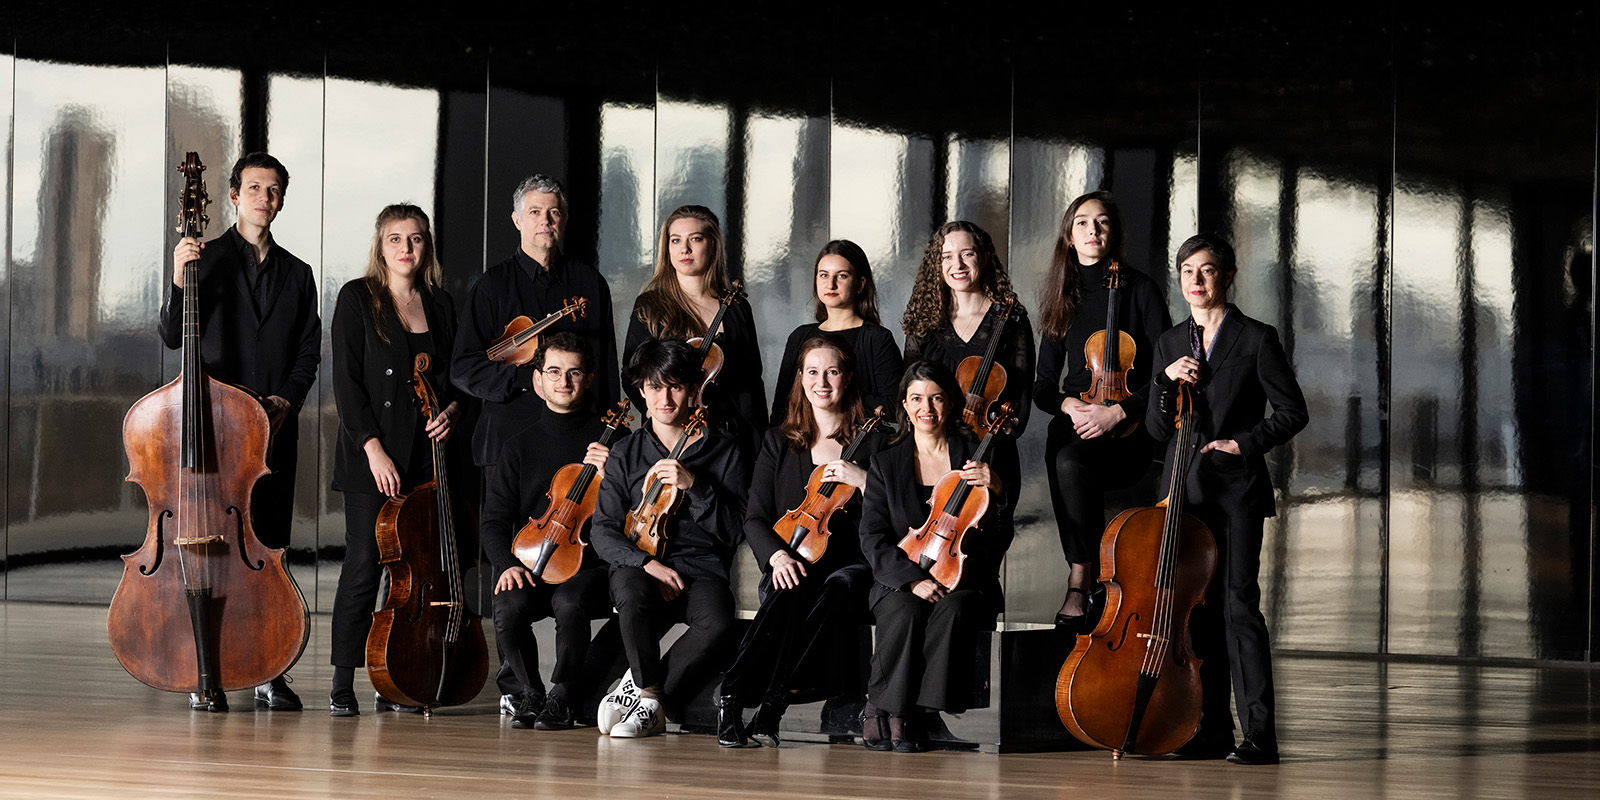 Twelve musicians in black clothing sit and stand in a large empty studio in front of windows while holding string instruments.